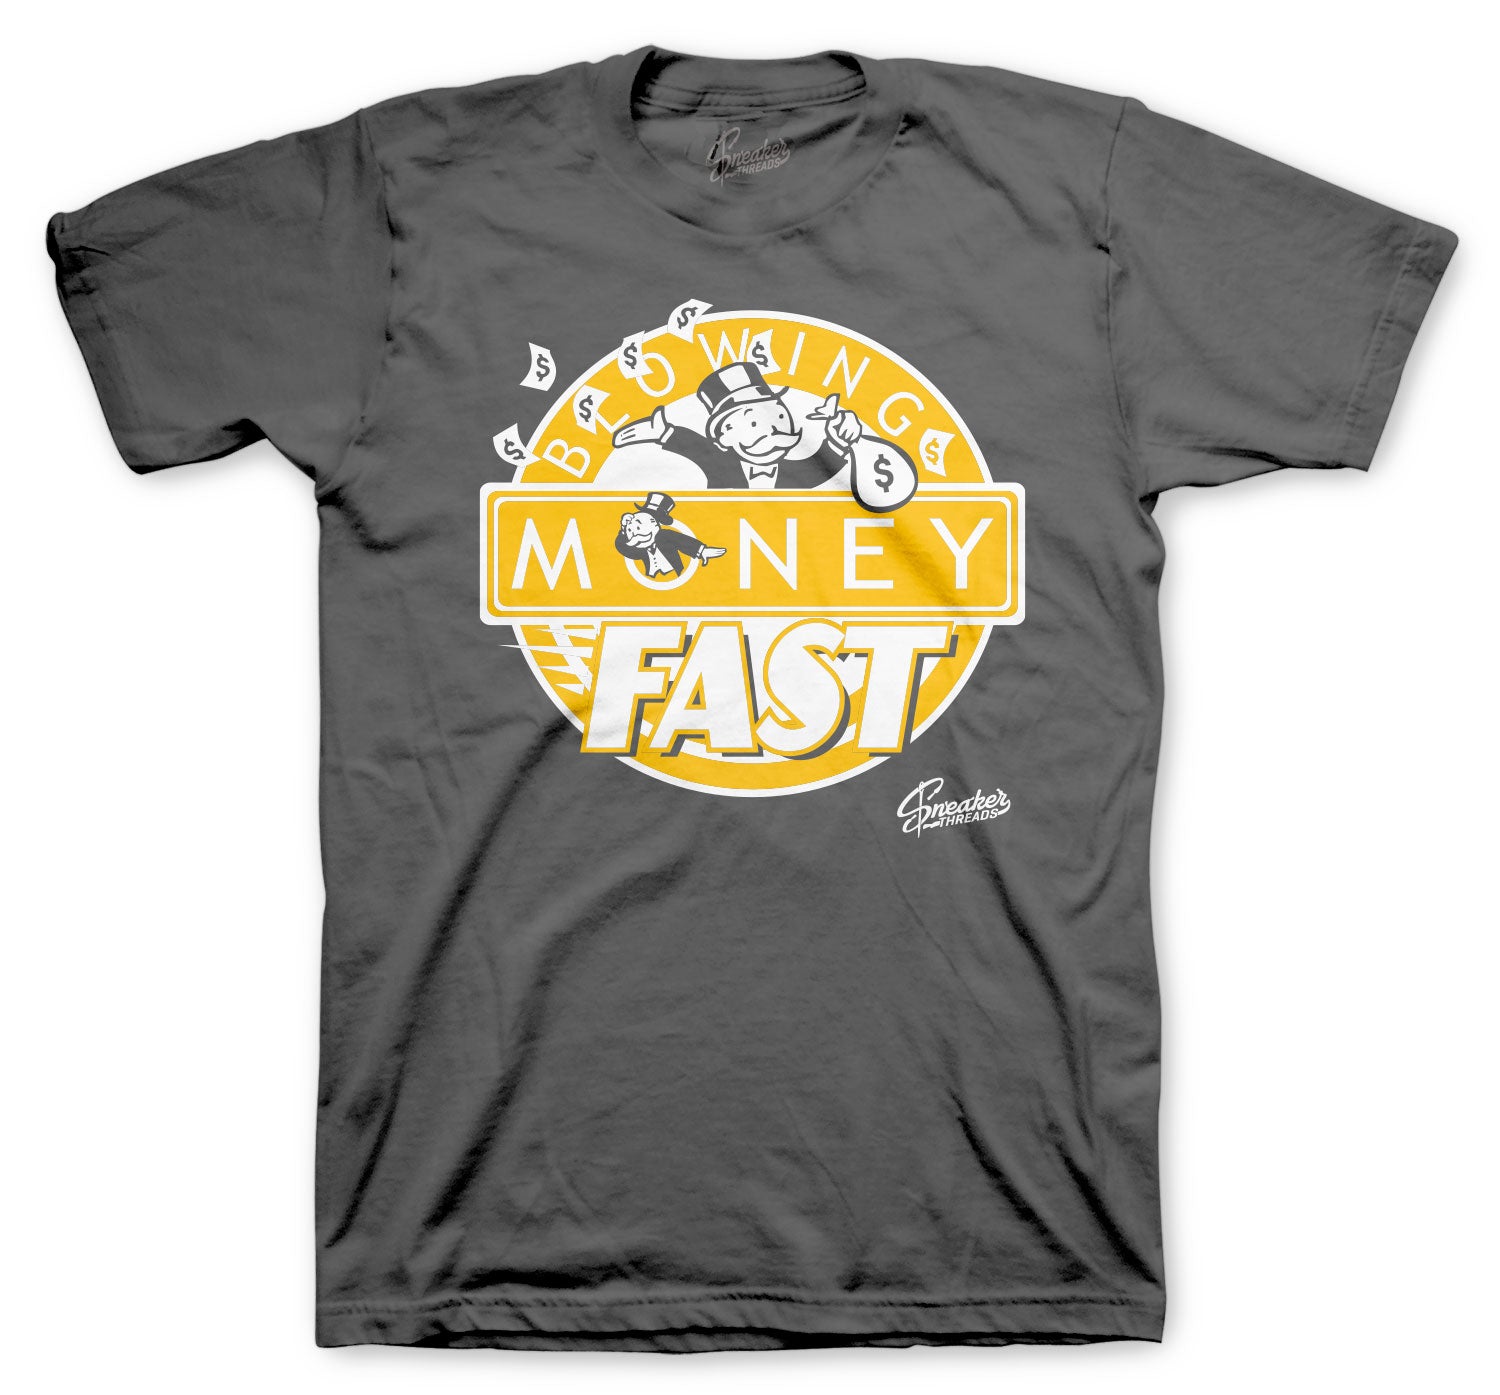 Retro 3 Cool Grey Shirt - Blowing Money Fast - Charcoal